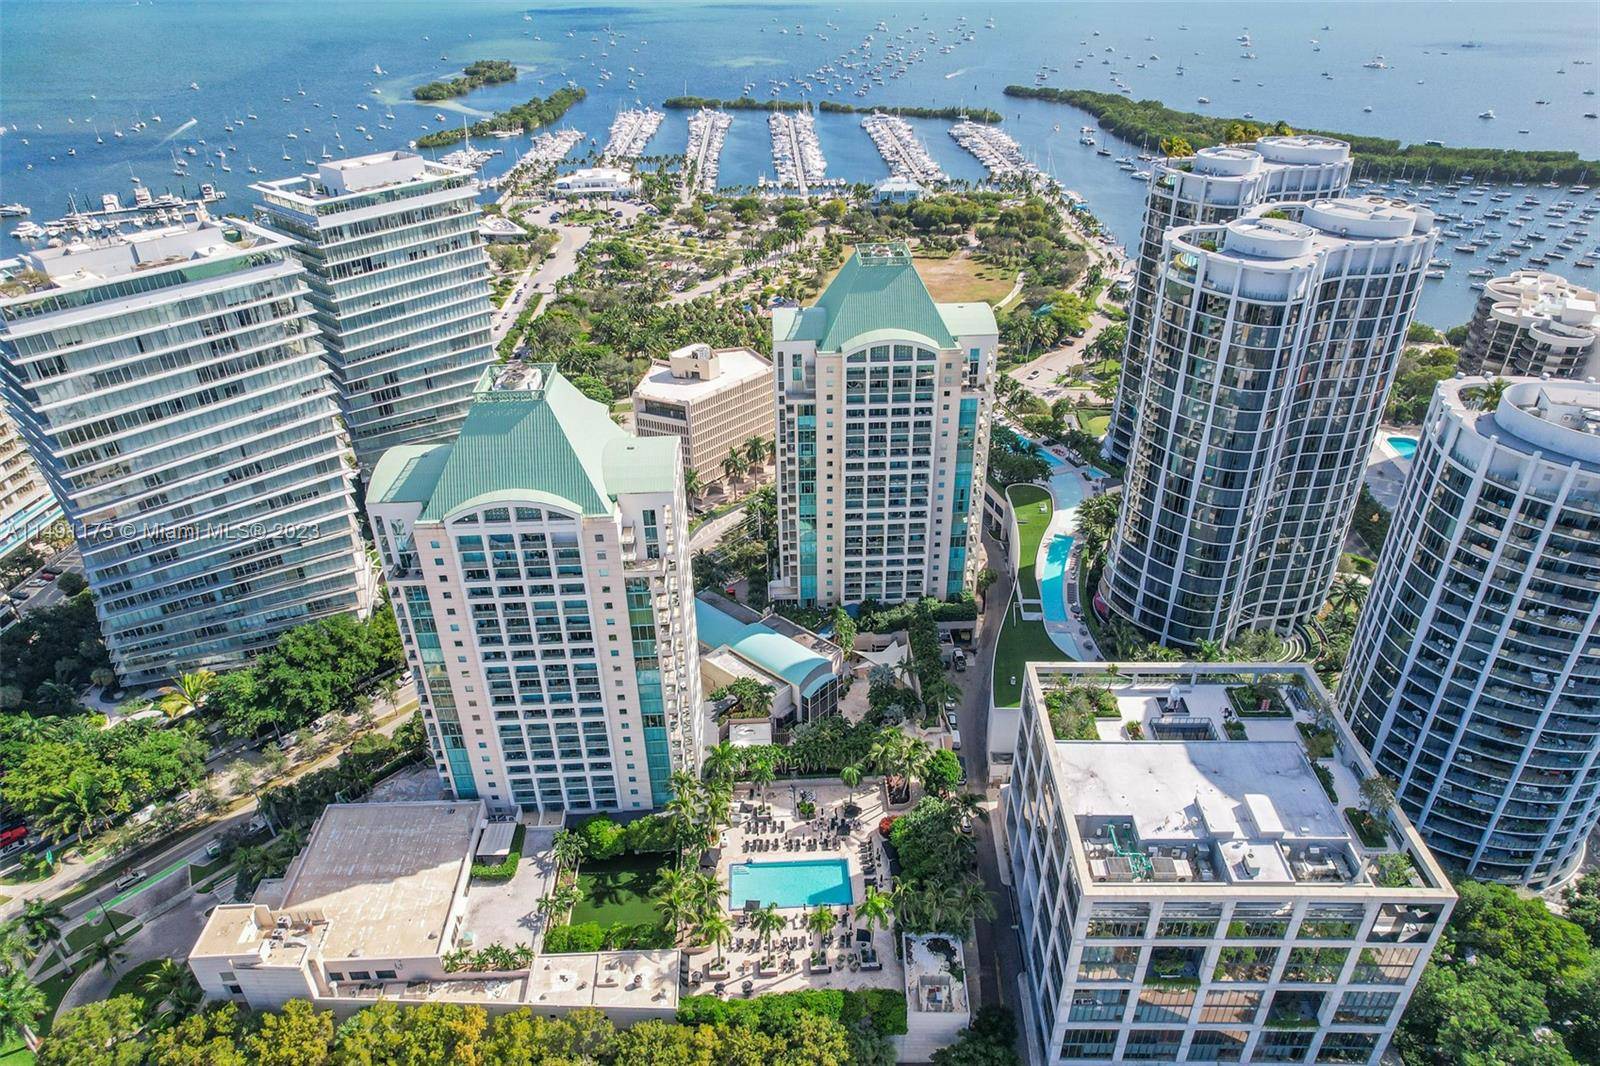 WELCOME TO LIVING IN STYLE AT THE RITZ IN COCONUT GROVE.